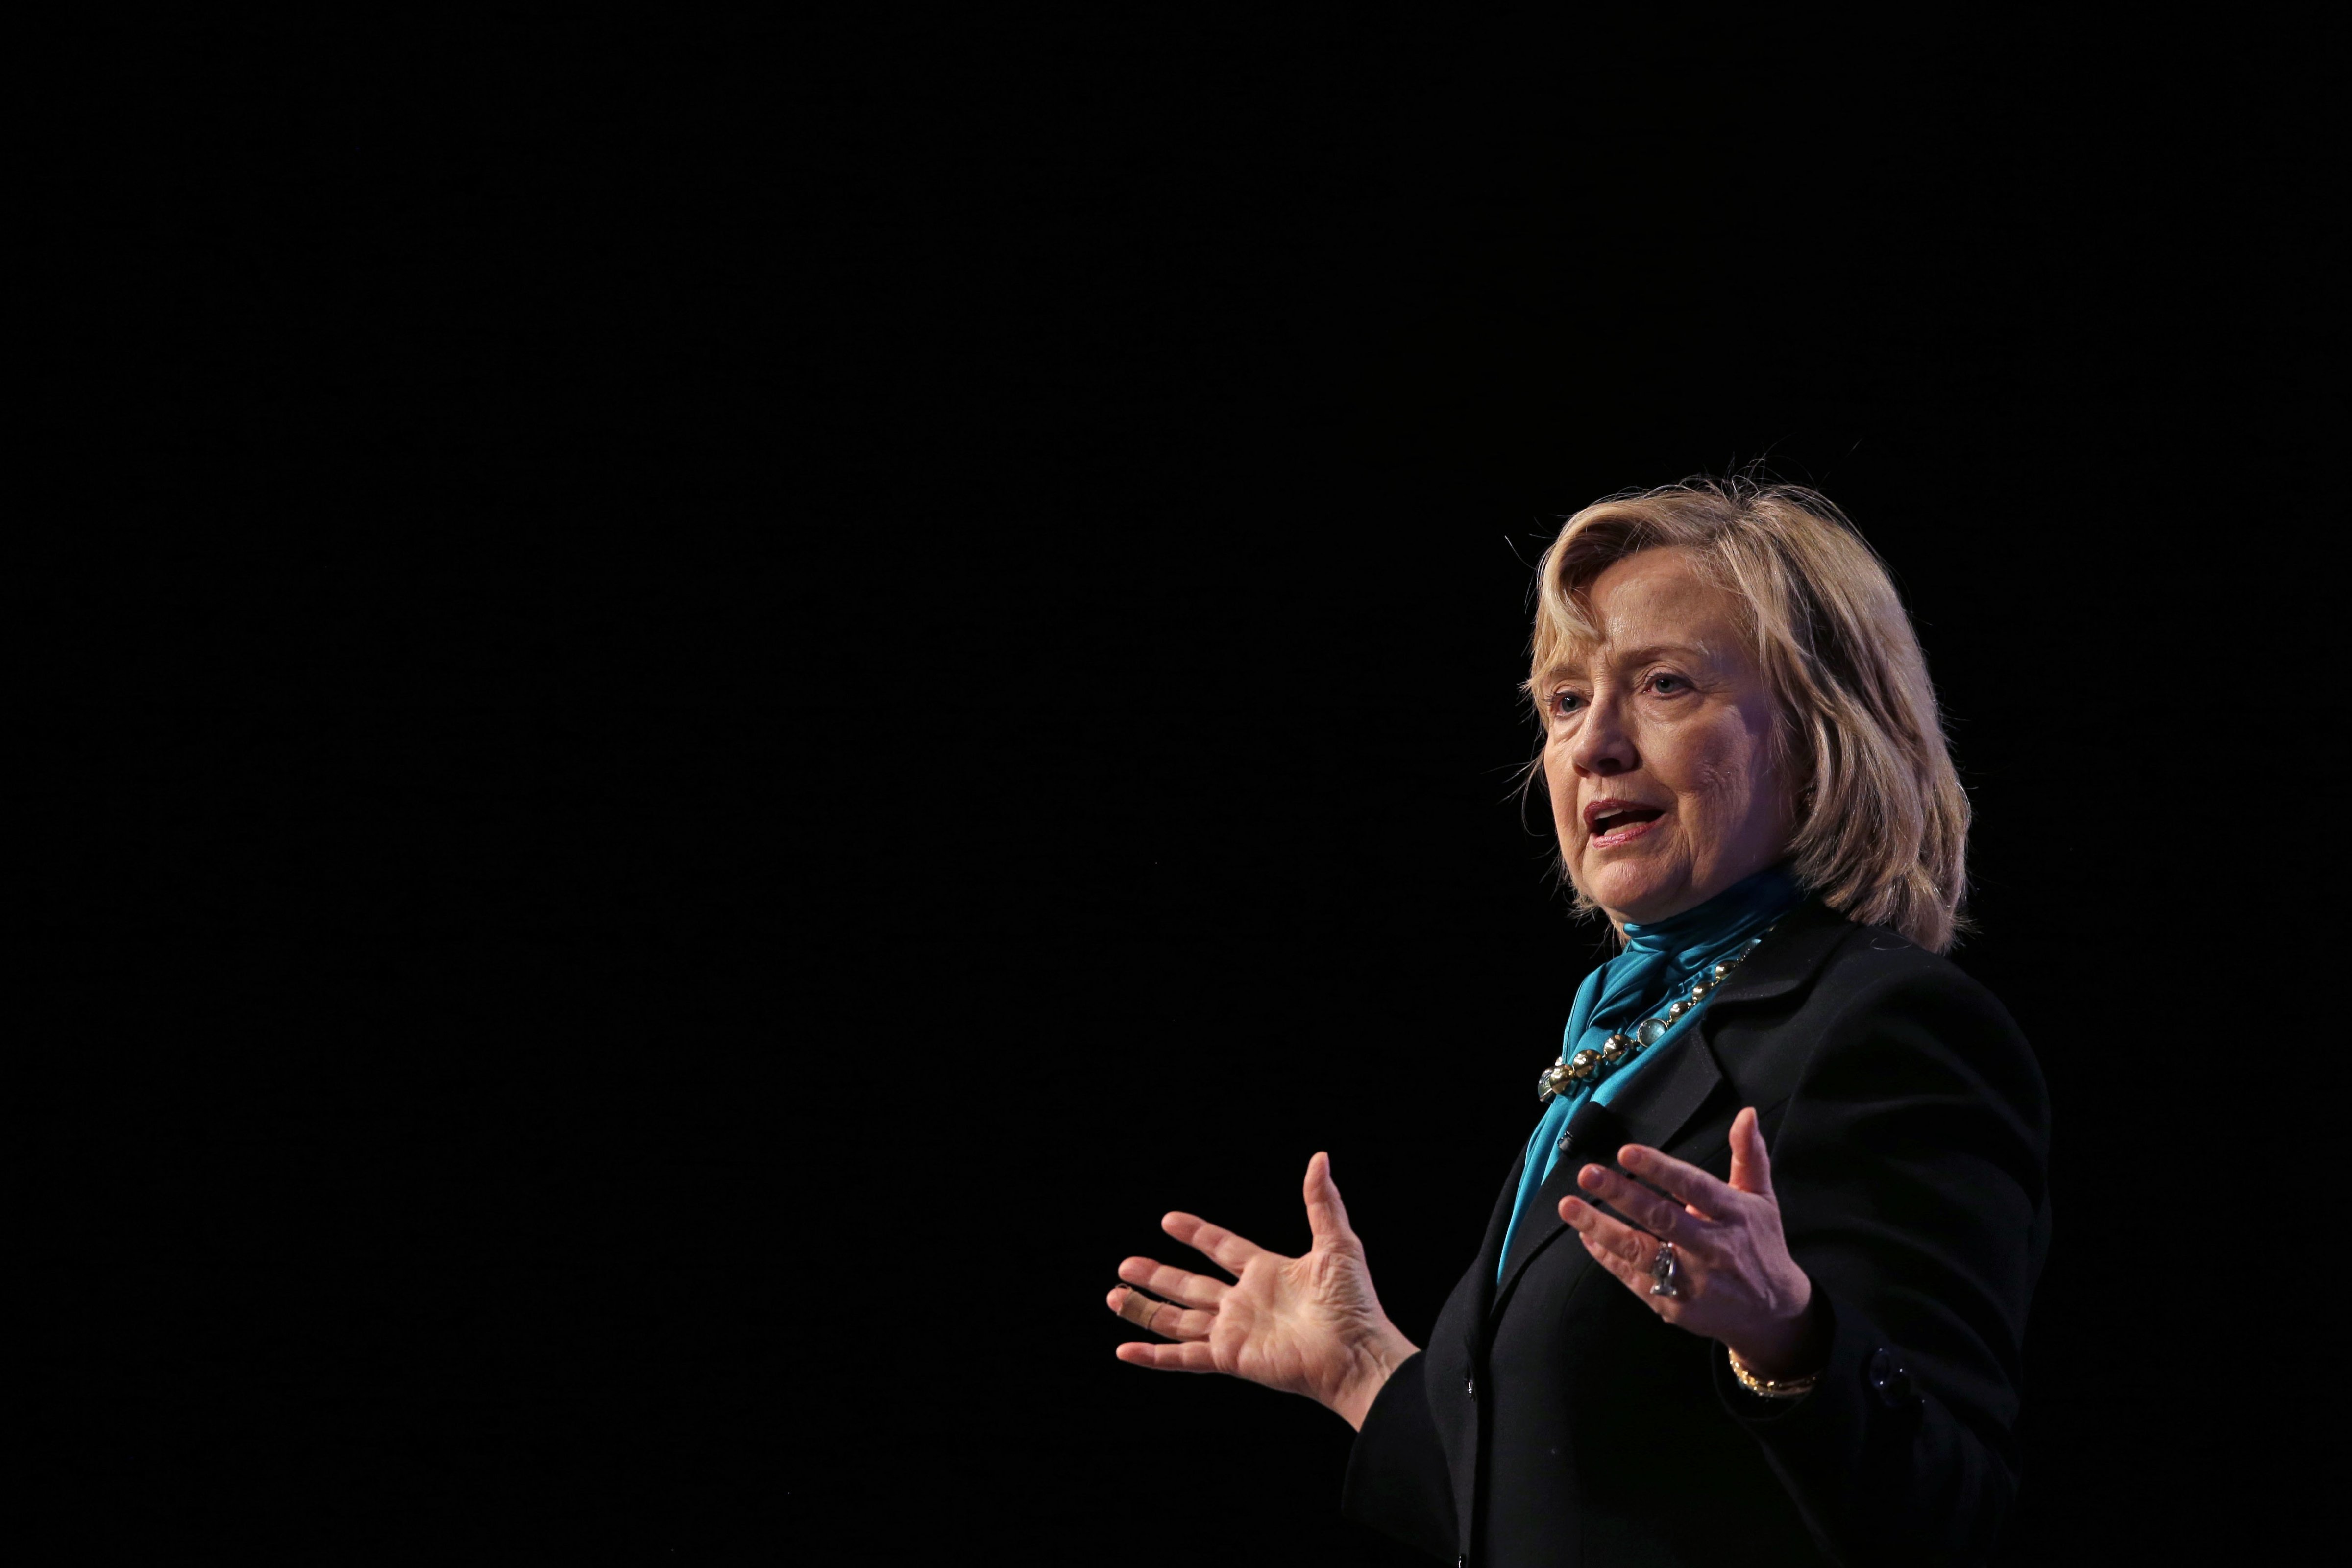 Former Secretary of State Hillary Rodham Clinton delivers remarks to the National Automobile Dealers Association's meeting in New Orleans on Jan. 27, 2014 (Gerald Herbert / AP)